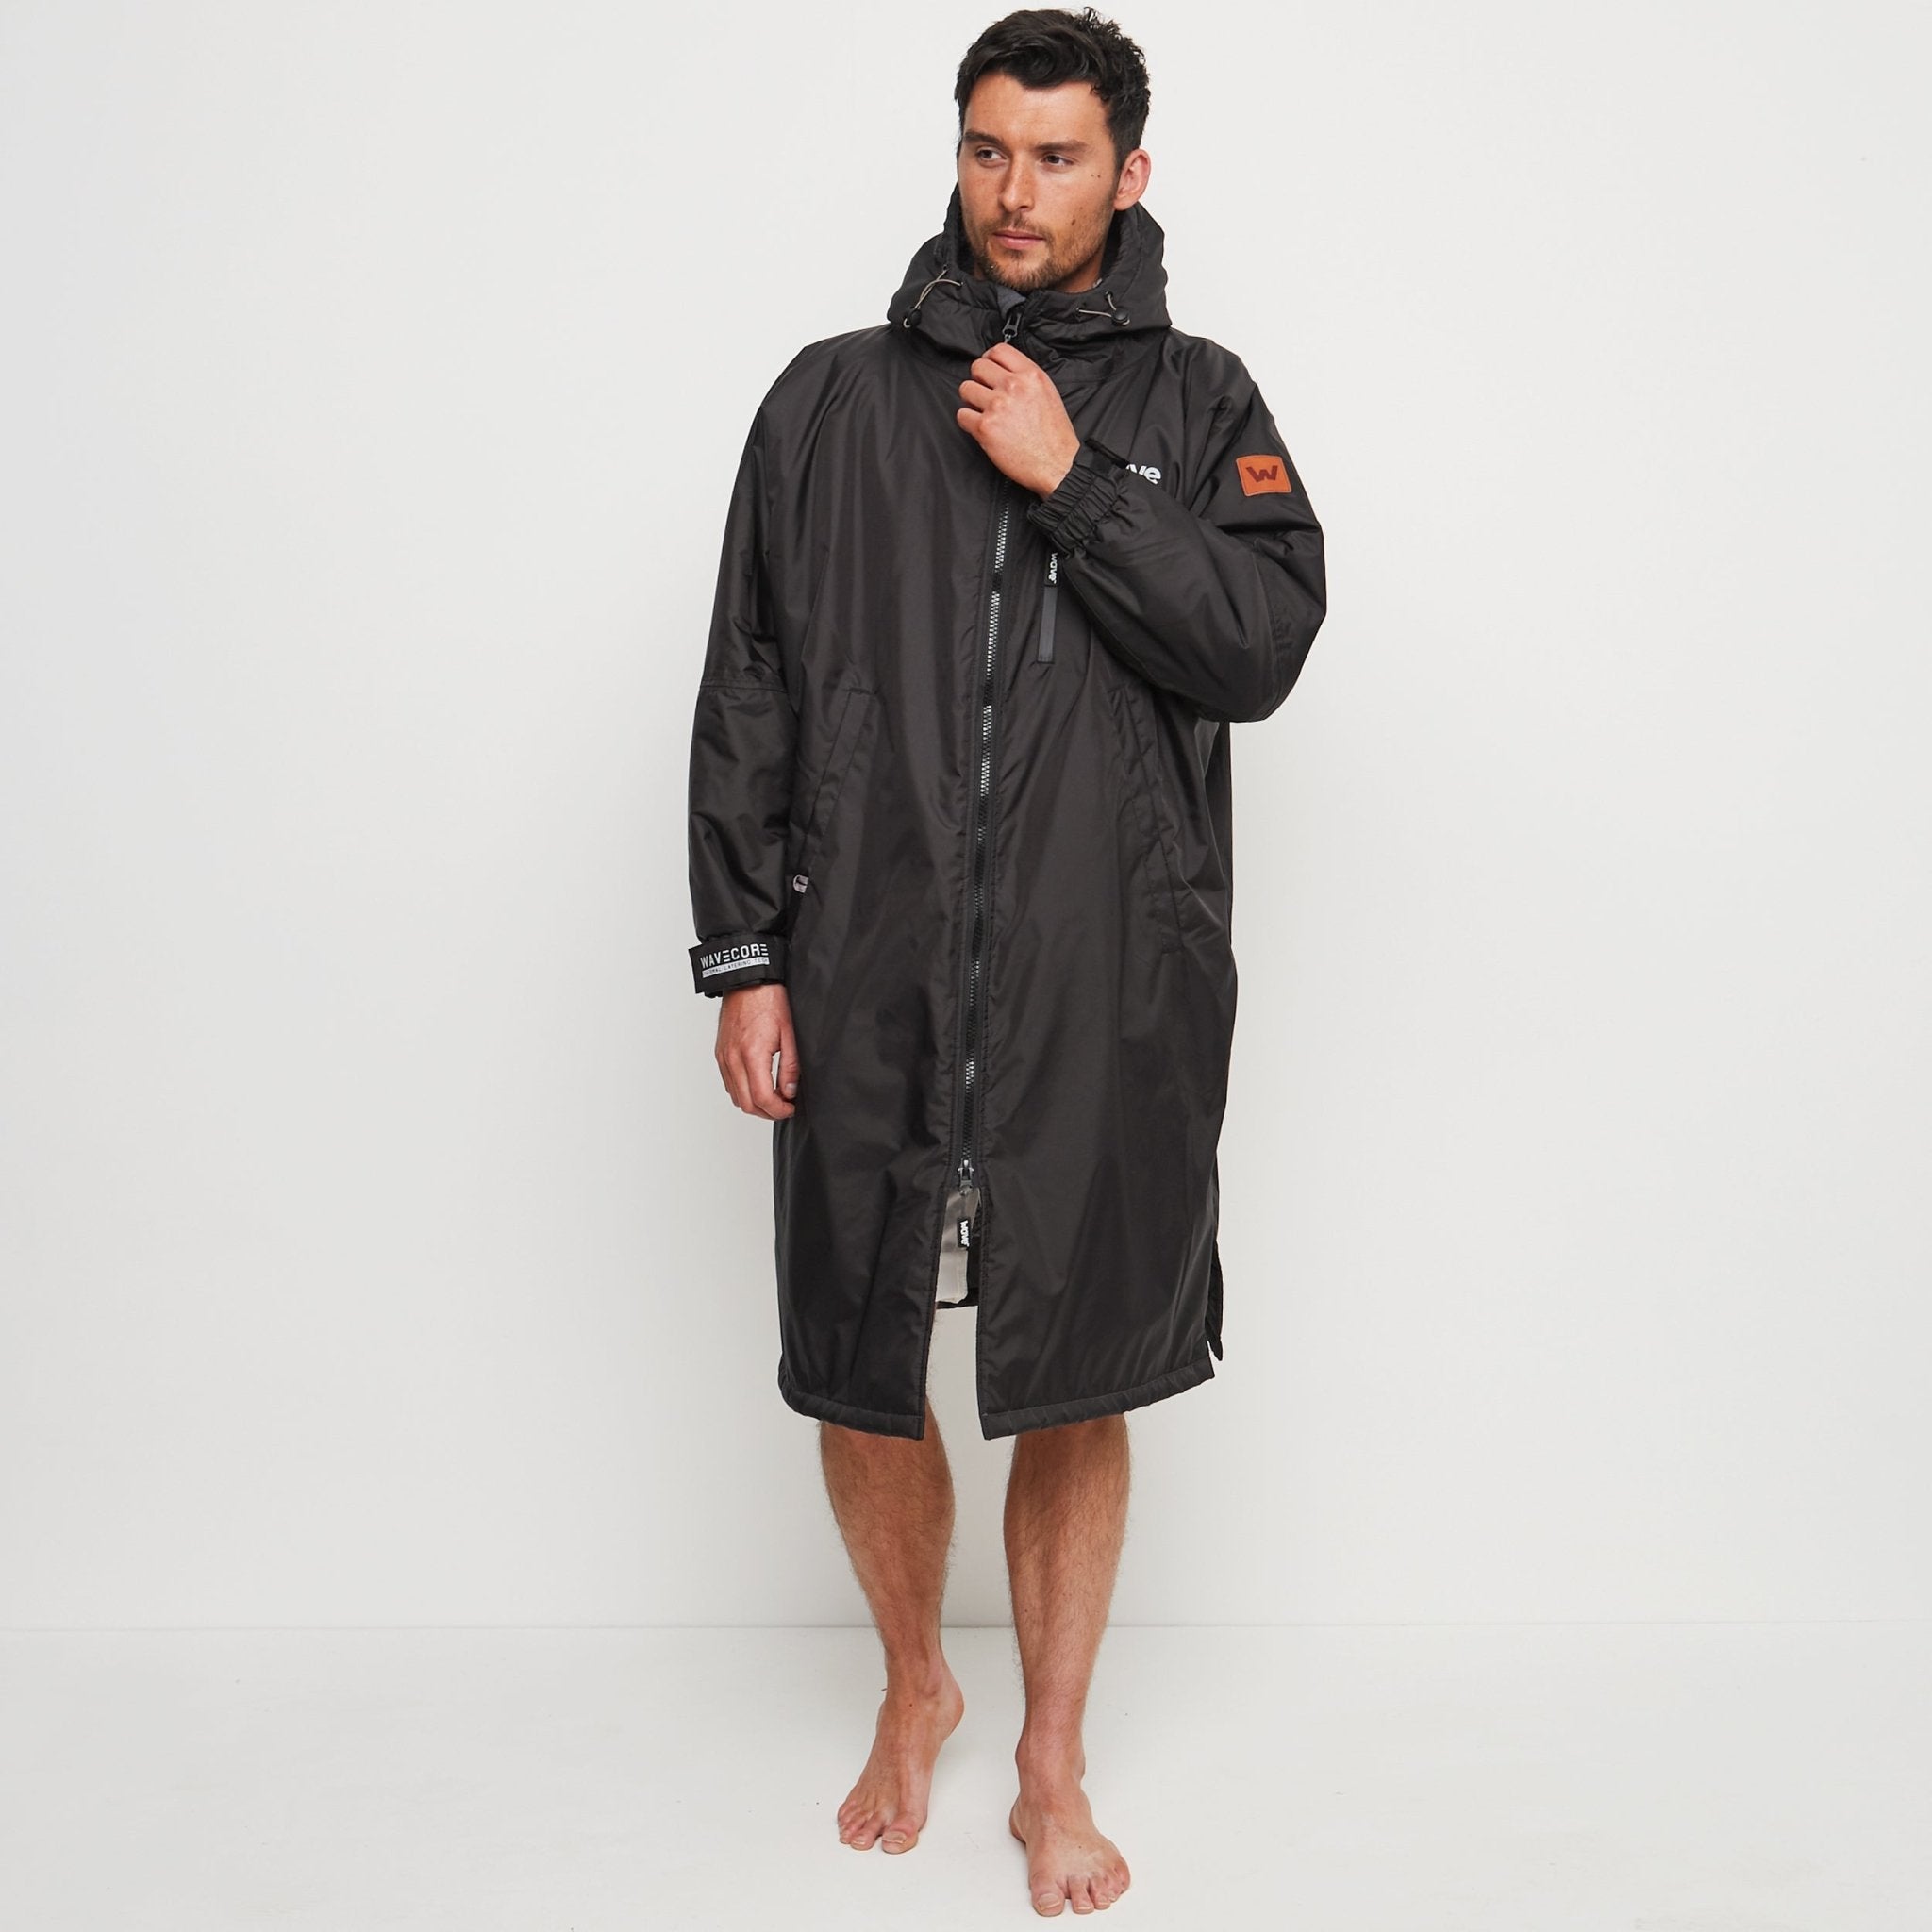 Fleece-Lined Changing Robe | Unisex | Black & Grey - Wave Spas Inflatable, foam Hot Tubs